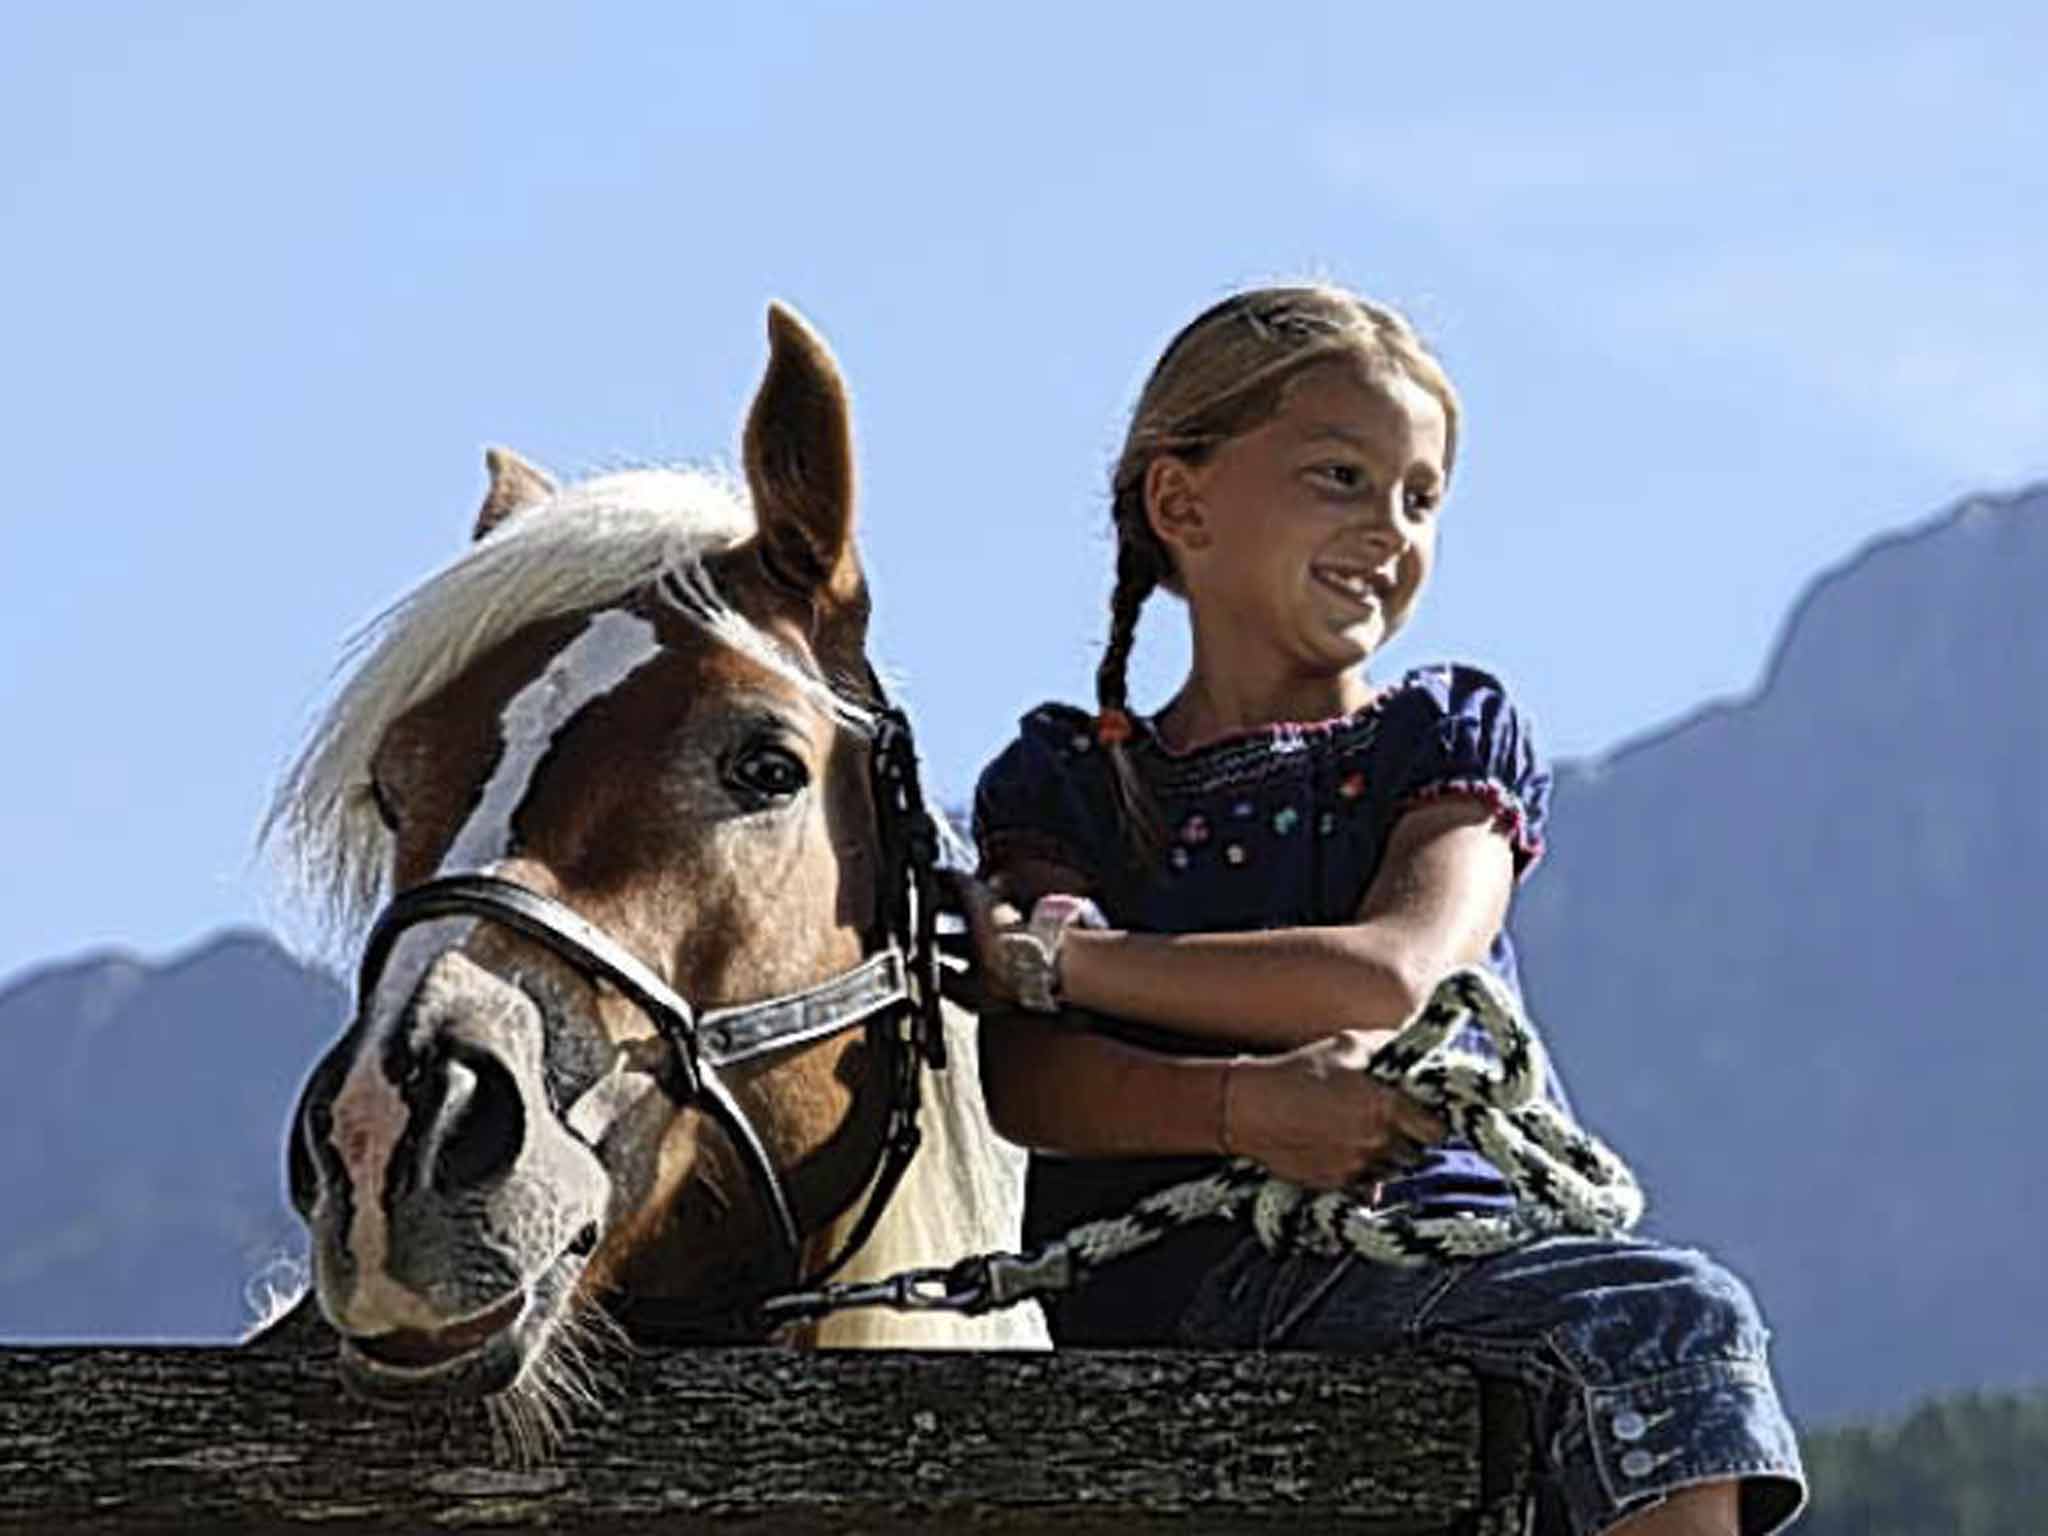 Go horse-riding in the Dolomites